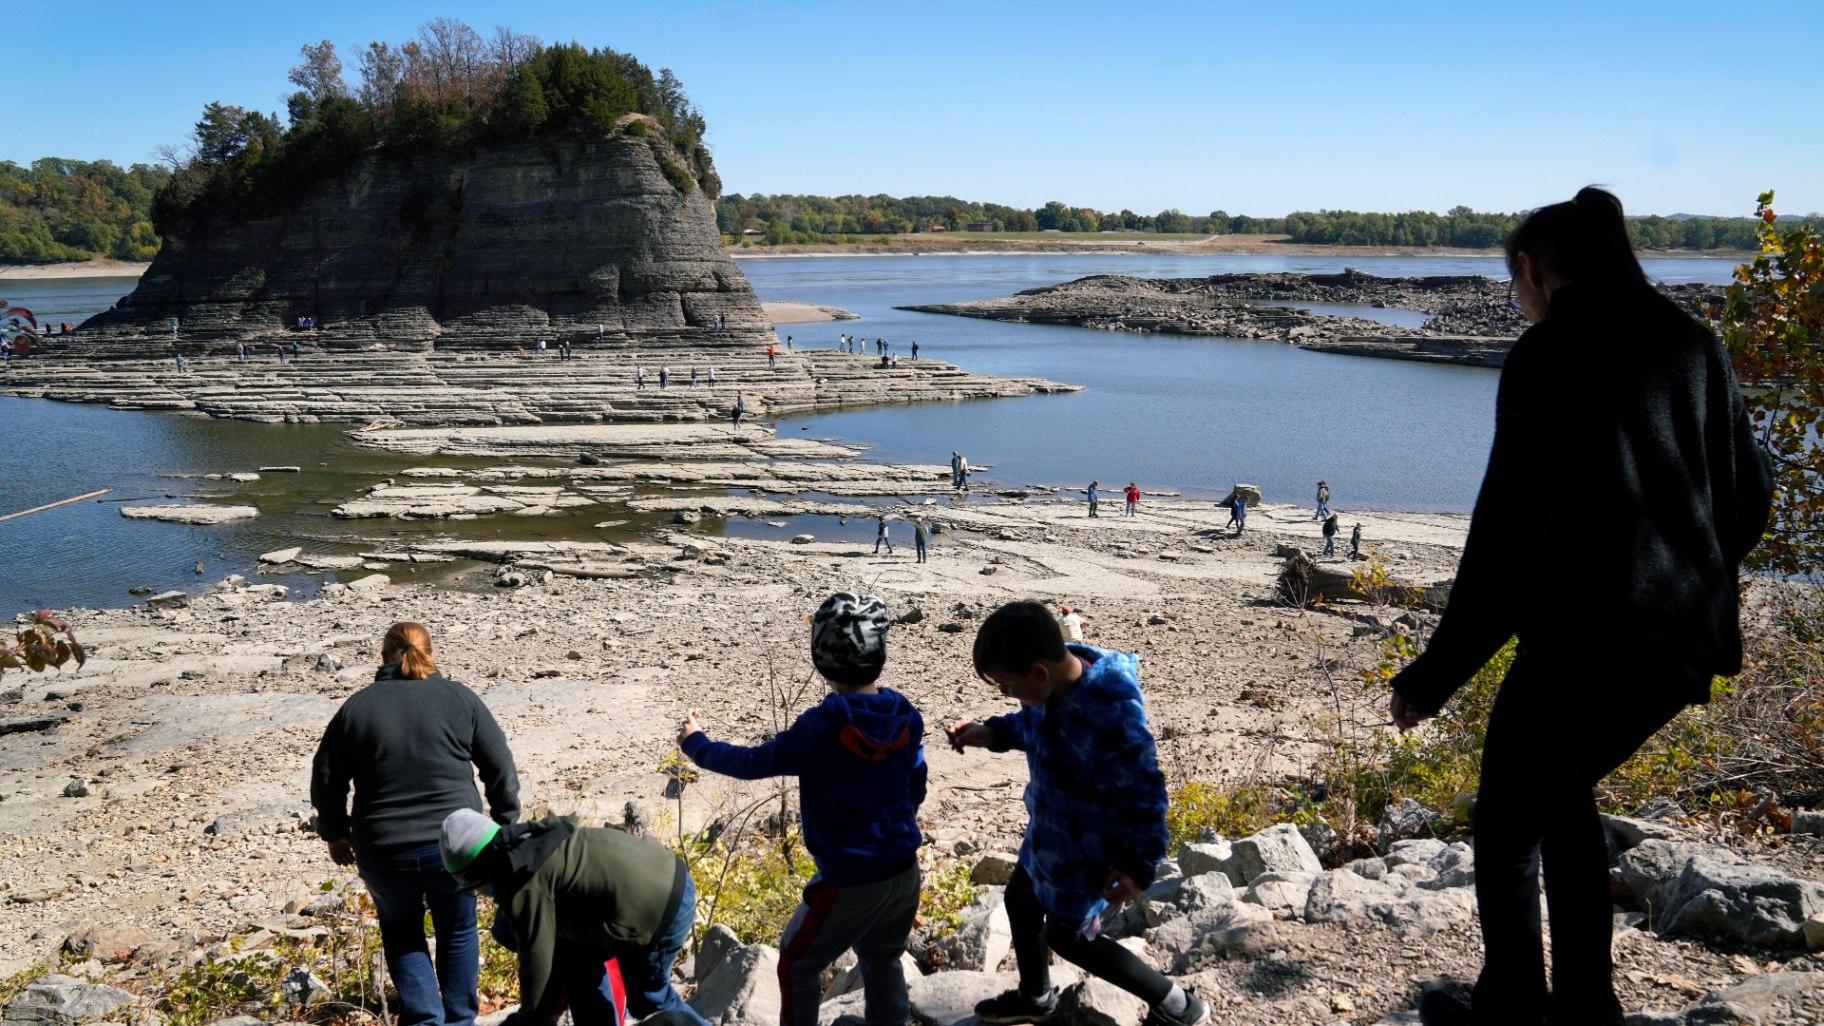 People walk toward Tower Rock to check out the attraction normally surrounded by the Mississippi River and only accessible by boat, Oct. 19, 2022, in Perry County, Mo. Foot traffic to the rock formation has been made possible because of near record low water levels along the river. (AP Photo / Jeff Roberson, File)